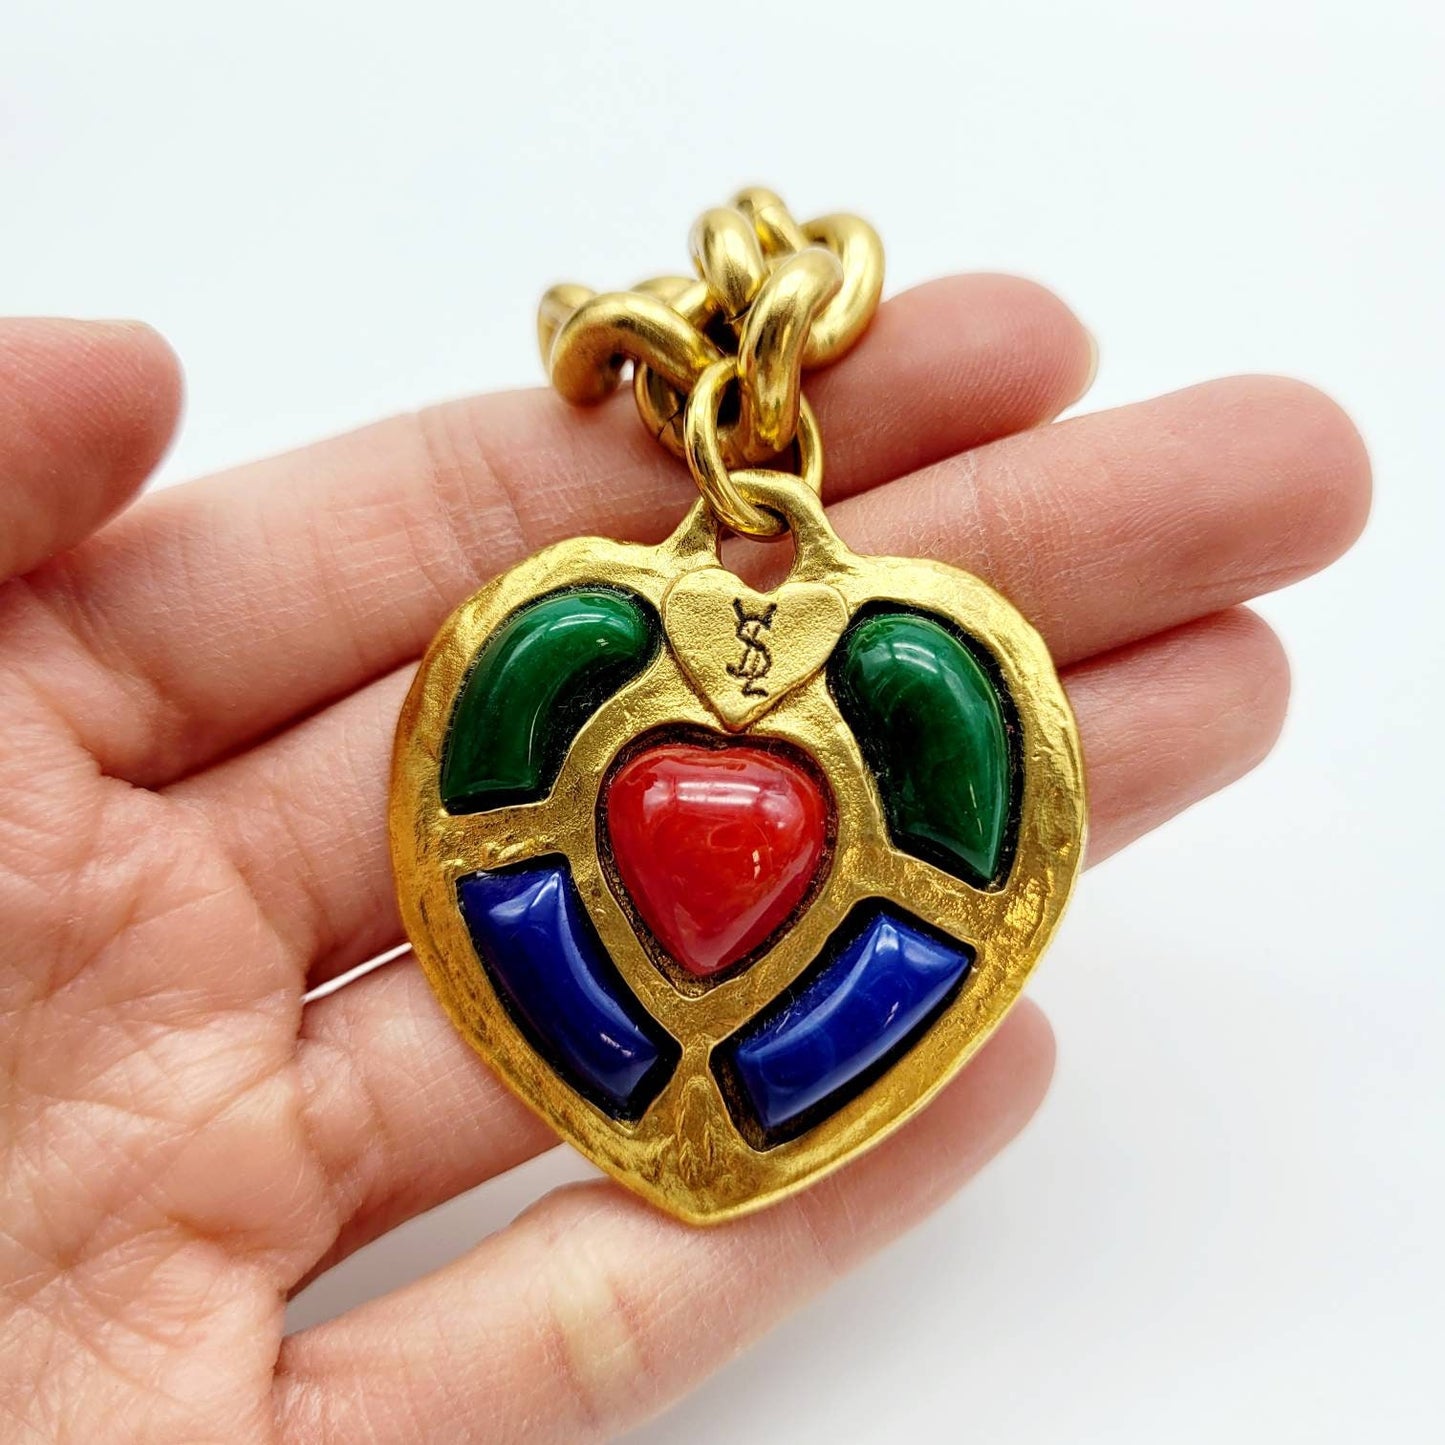 Vintage Yves Saint Laurent YSL Necklace with Multi-Colored Stones